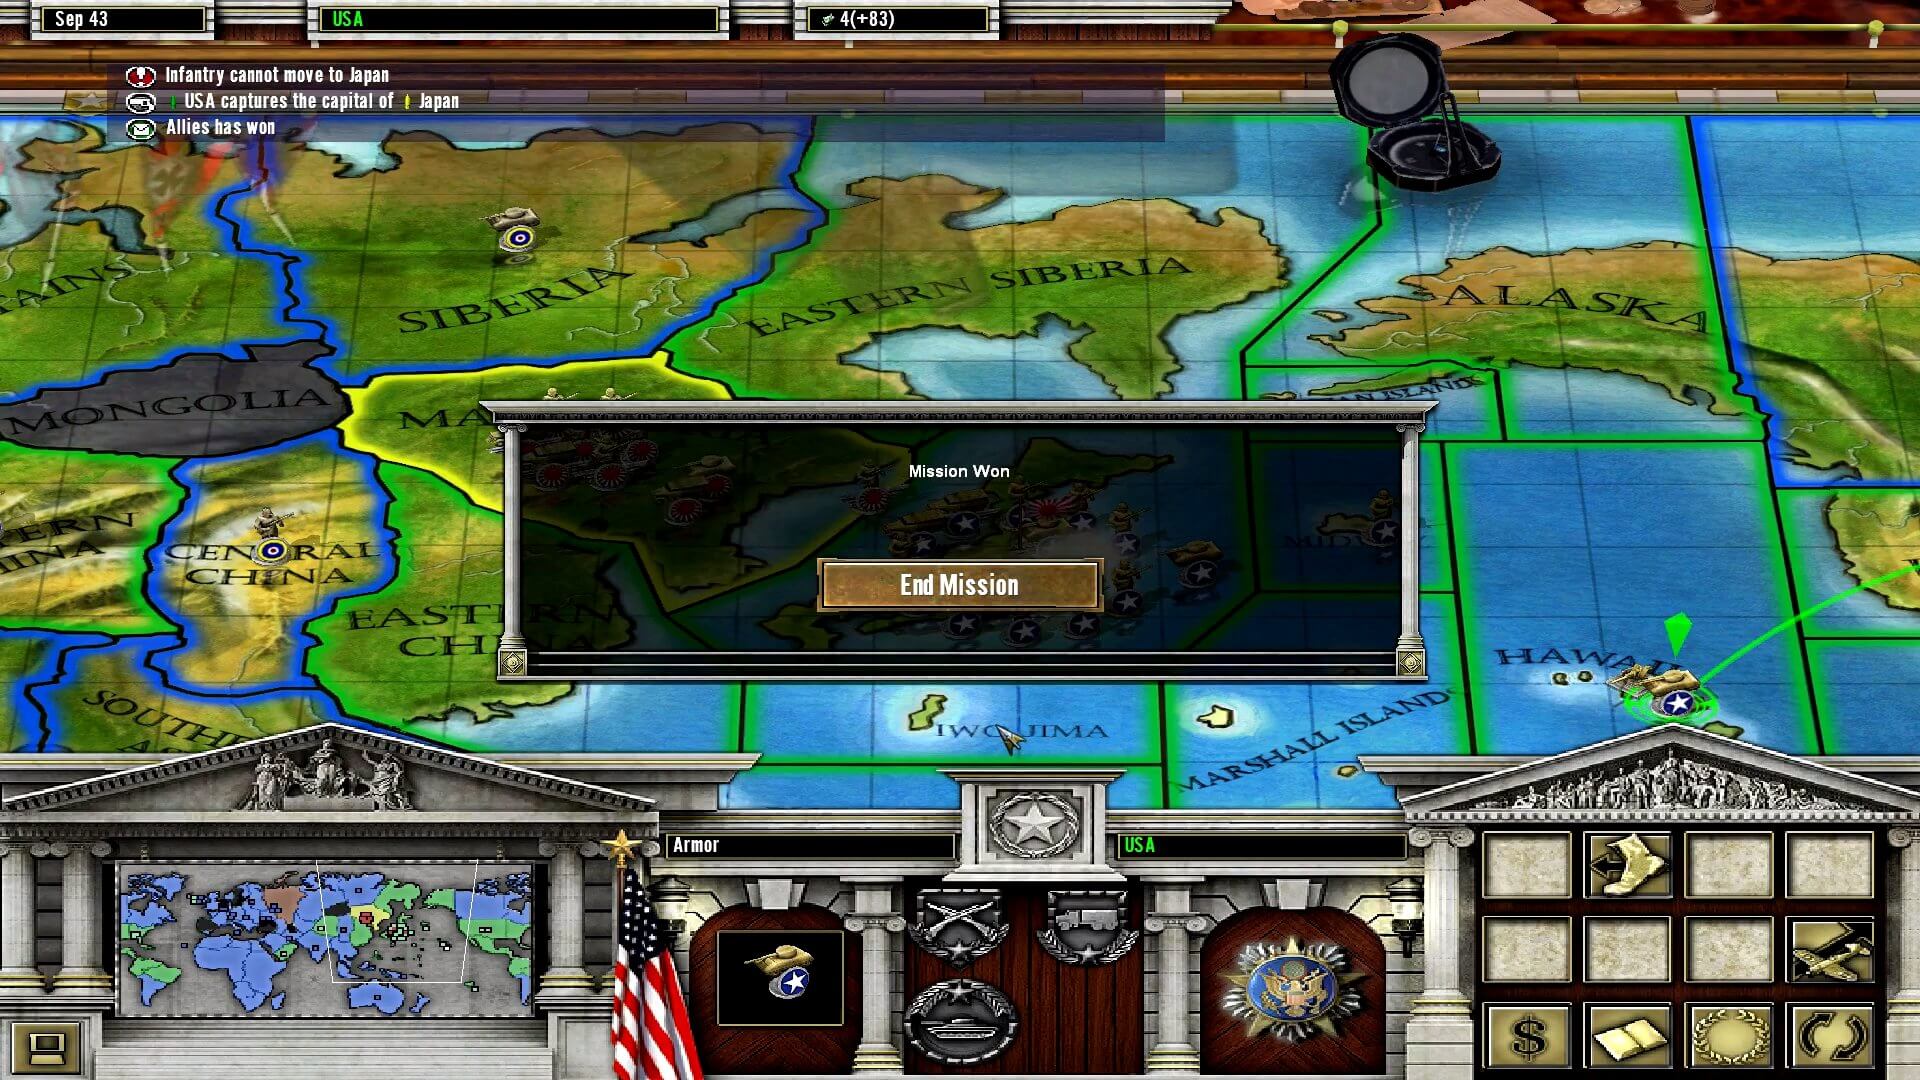 play-axis-and-allies-download-yellowhh